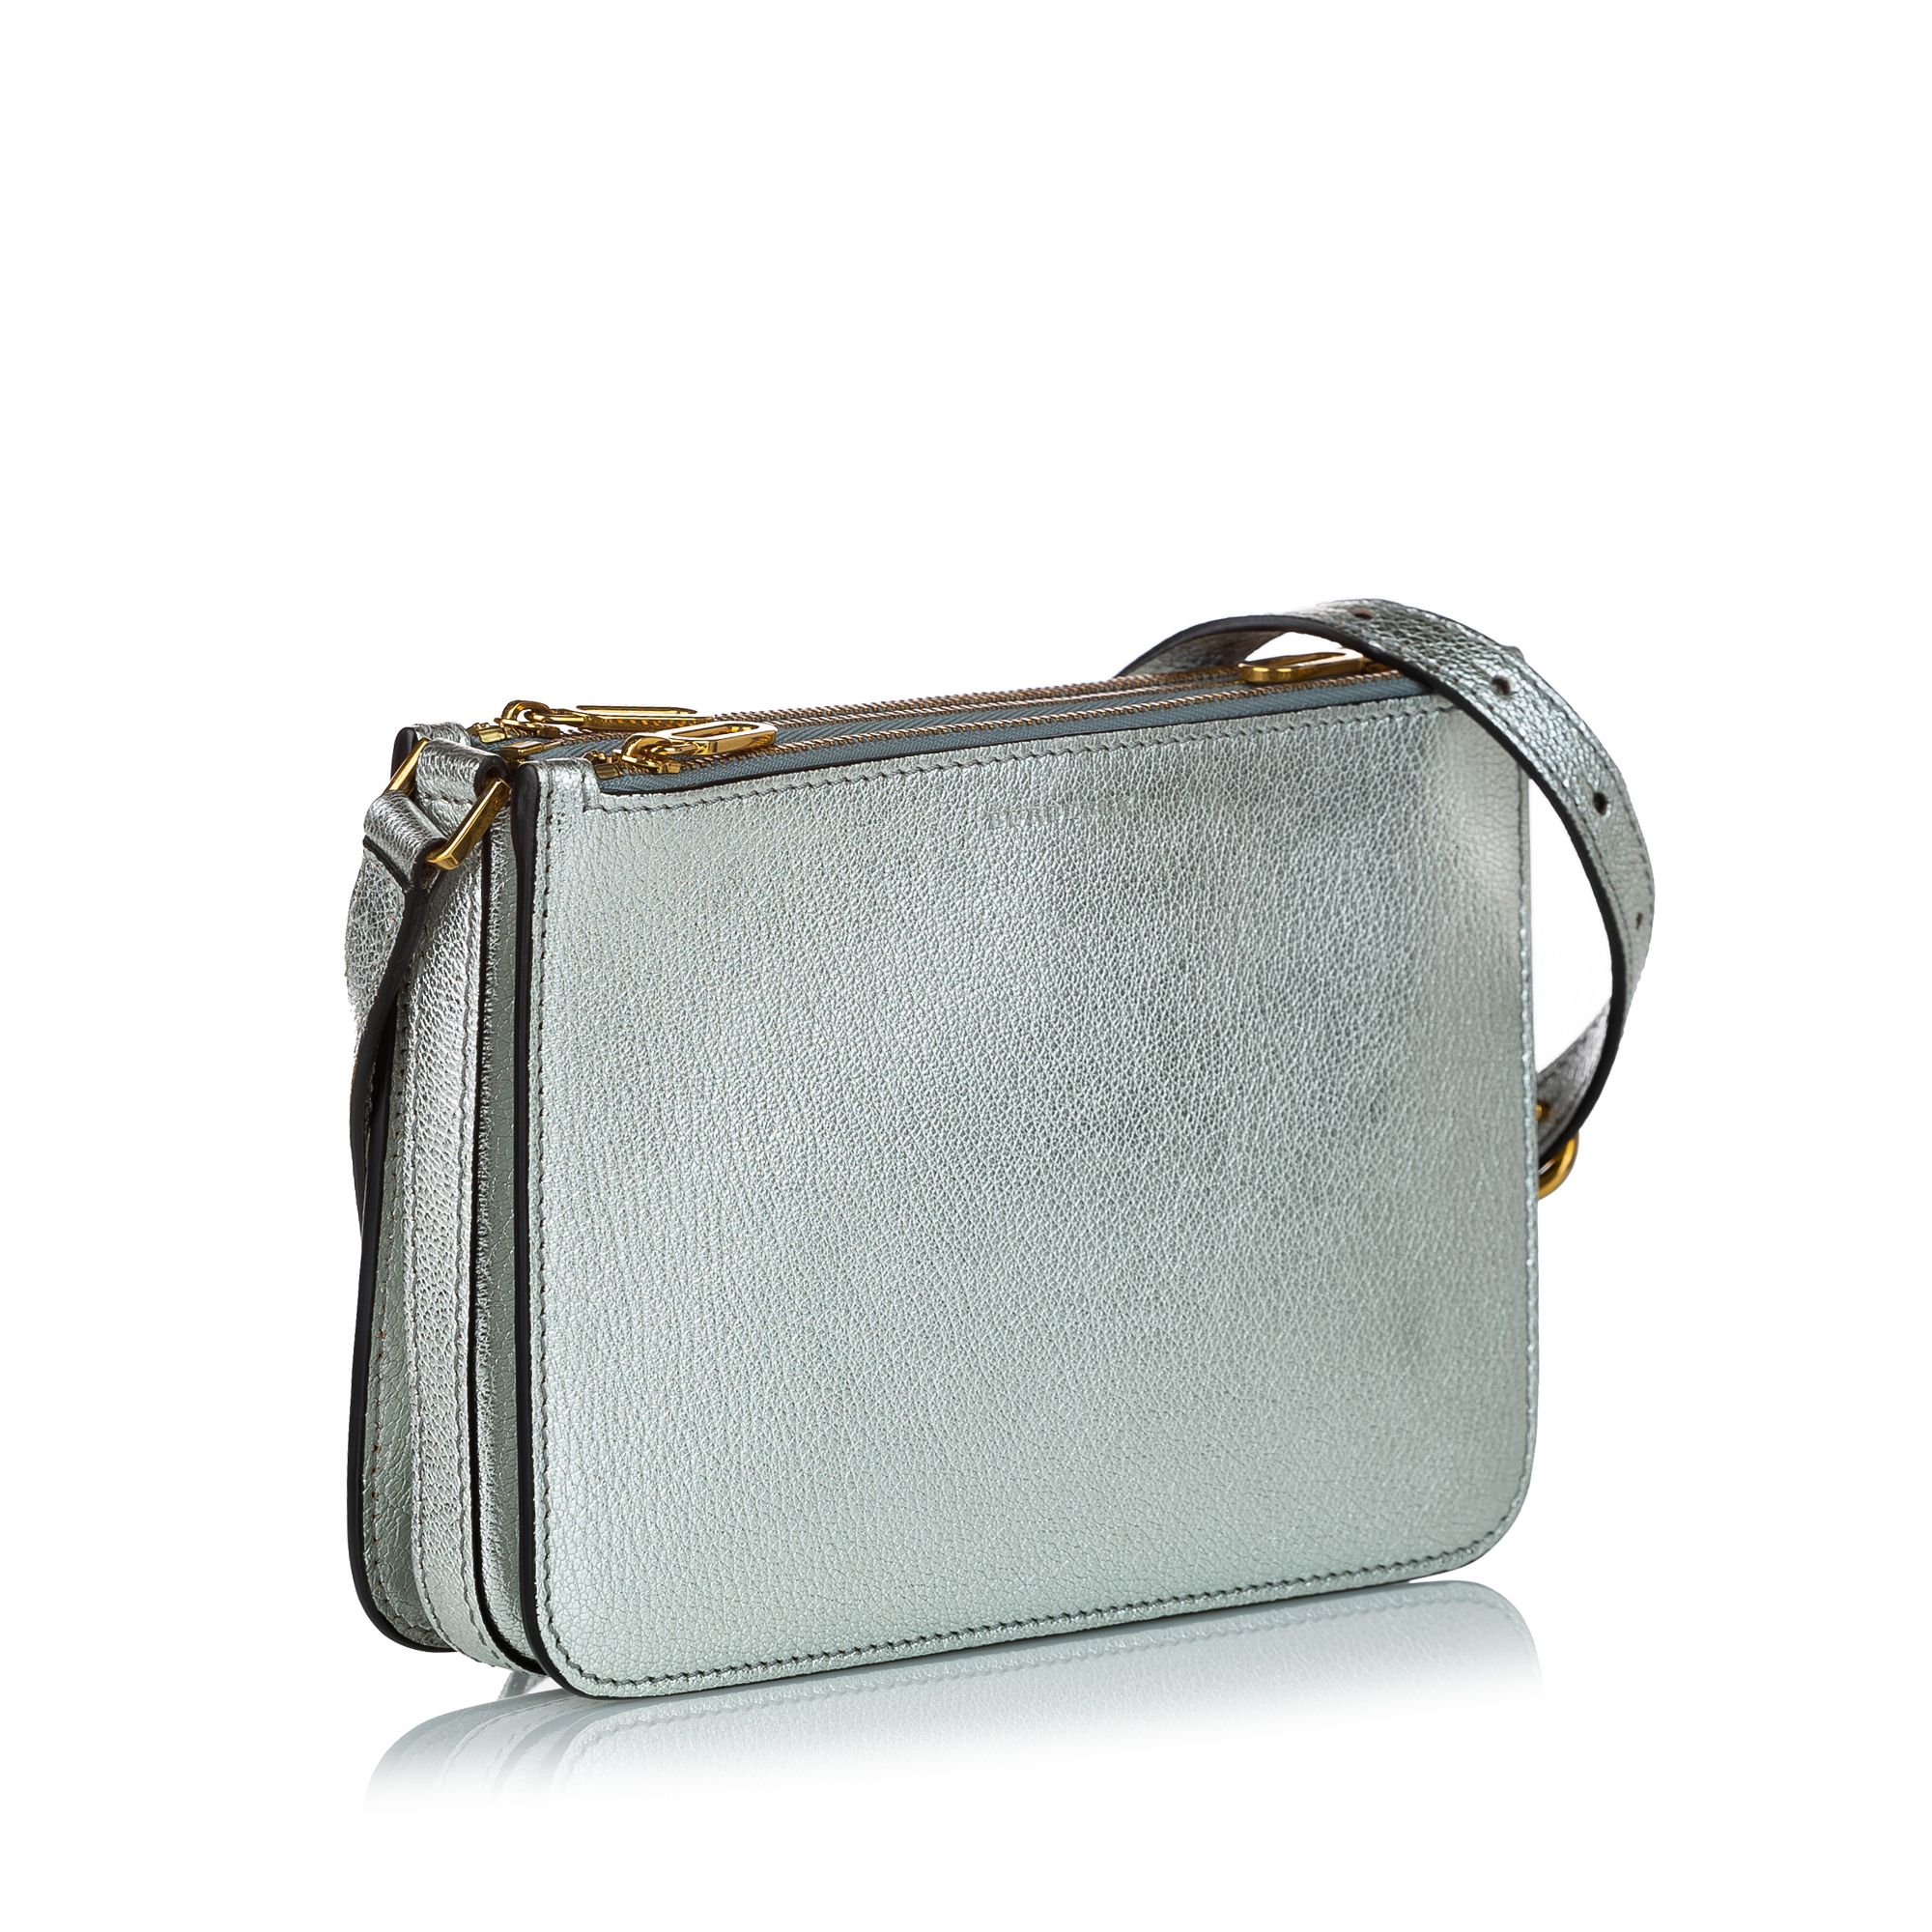 VINTAGE. RRP AS NEW. This crossbody bag features a leather body, an adjustable flat strap, a top zip closure.

Dimensions:
Length 14cm
Width 21cm
Depth 3cm
Shoulder Drop 58cm

Original Accessories: Dust Bag, Dust Bag, Authenticity Card

Serial Number: ITALBSRL239CAL
Color: Silver
Material: Leather x Calf
Country of Origin: Italy
Boutique Reference: SSU155378K1342


Product Rating: GoodCondition

Certificate of Authenticity is available upon request with no extra fee required. Please contact our customer service team.